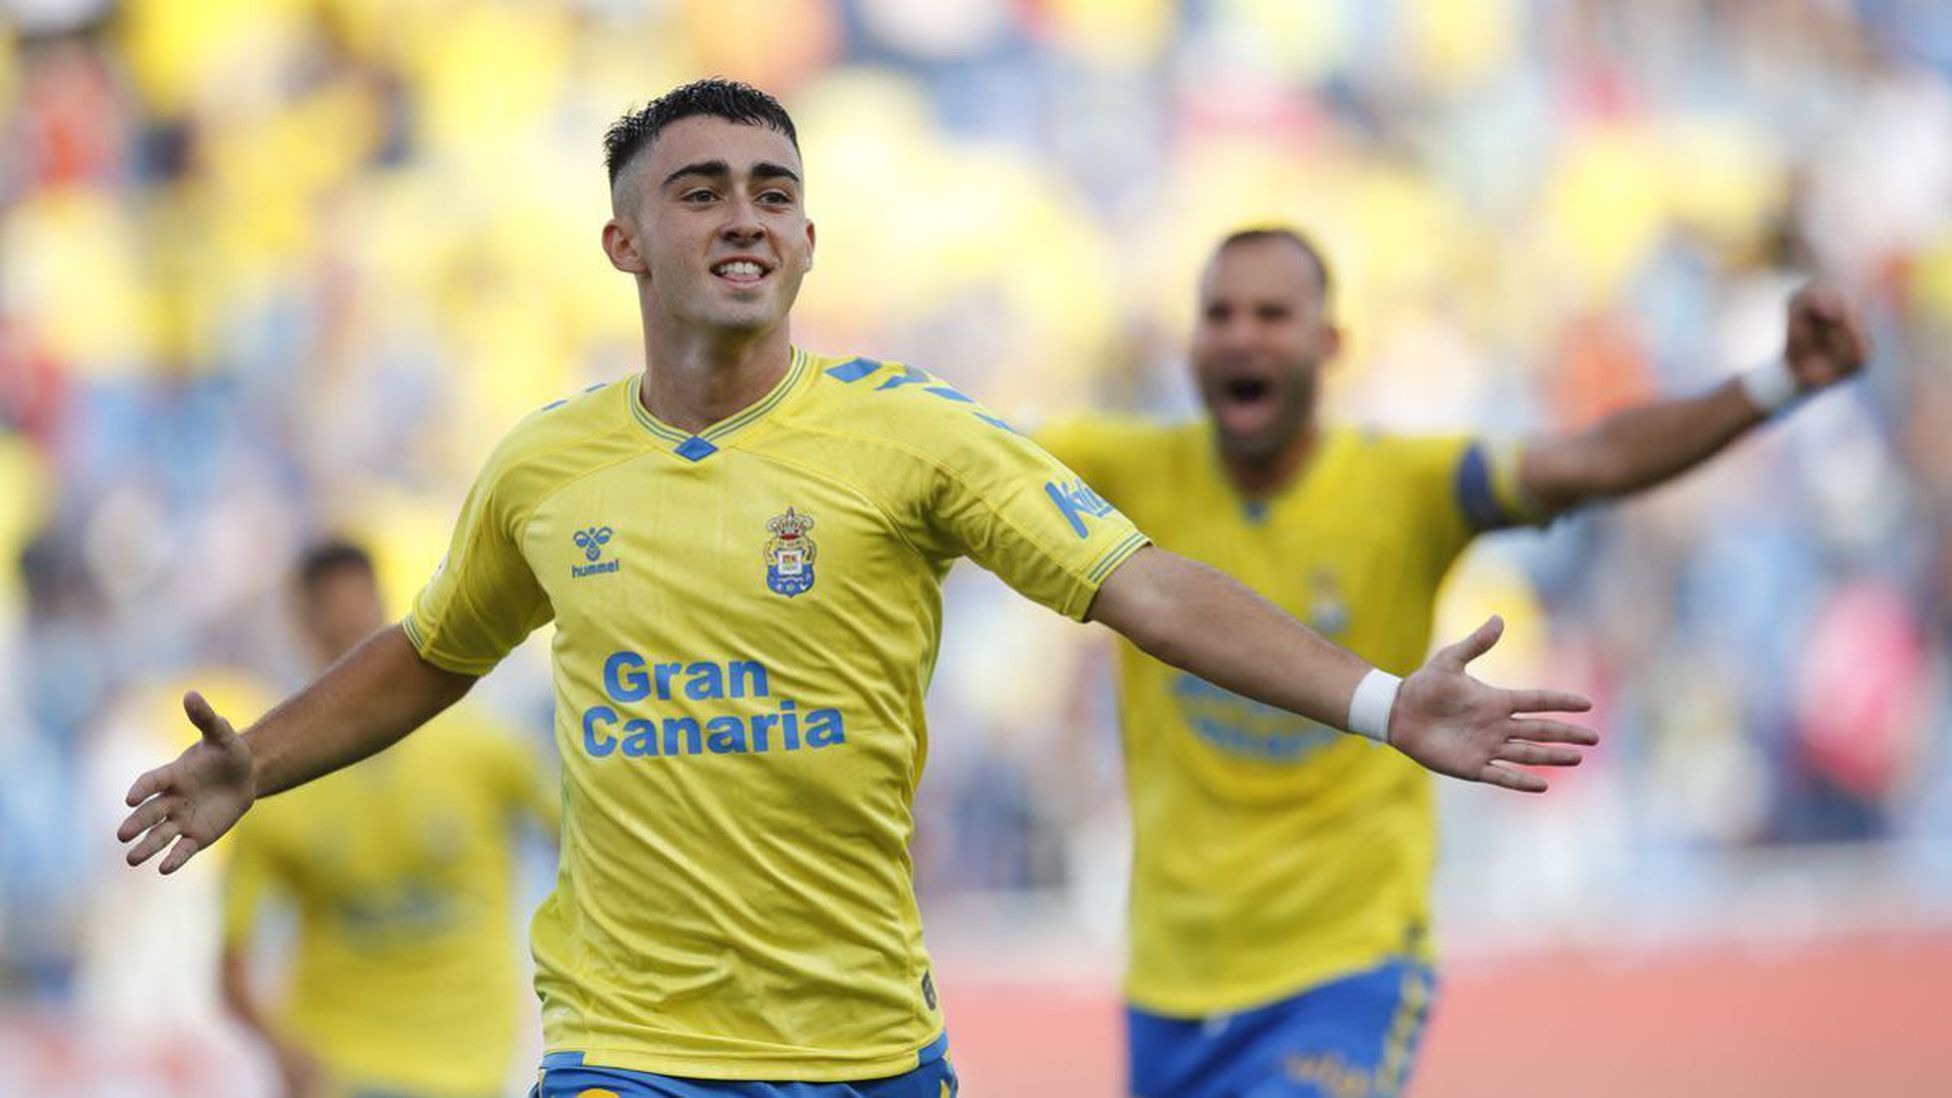 Barcelona risk release clause of Las Palmas starlet doubling